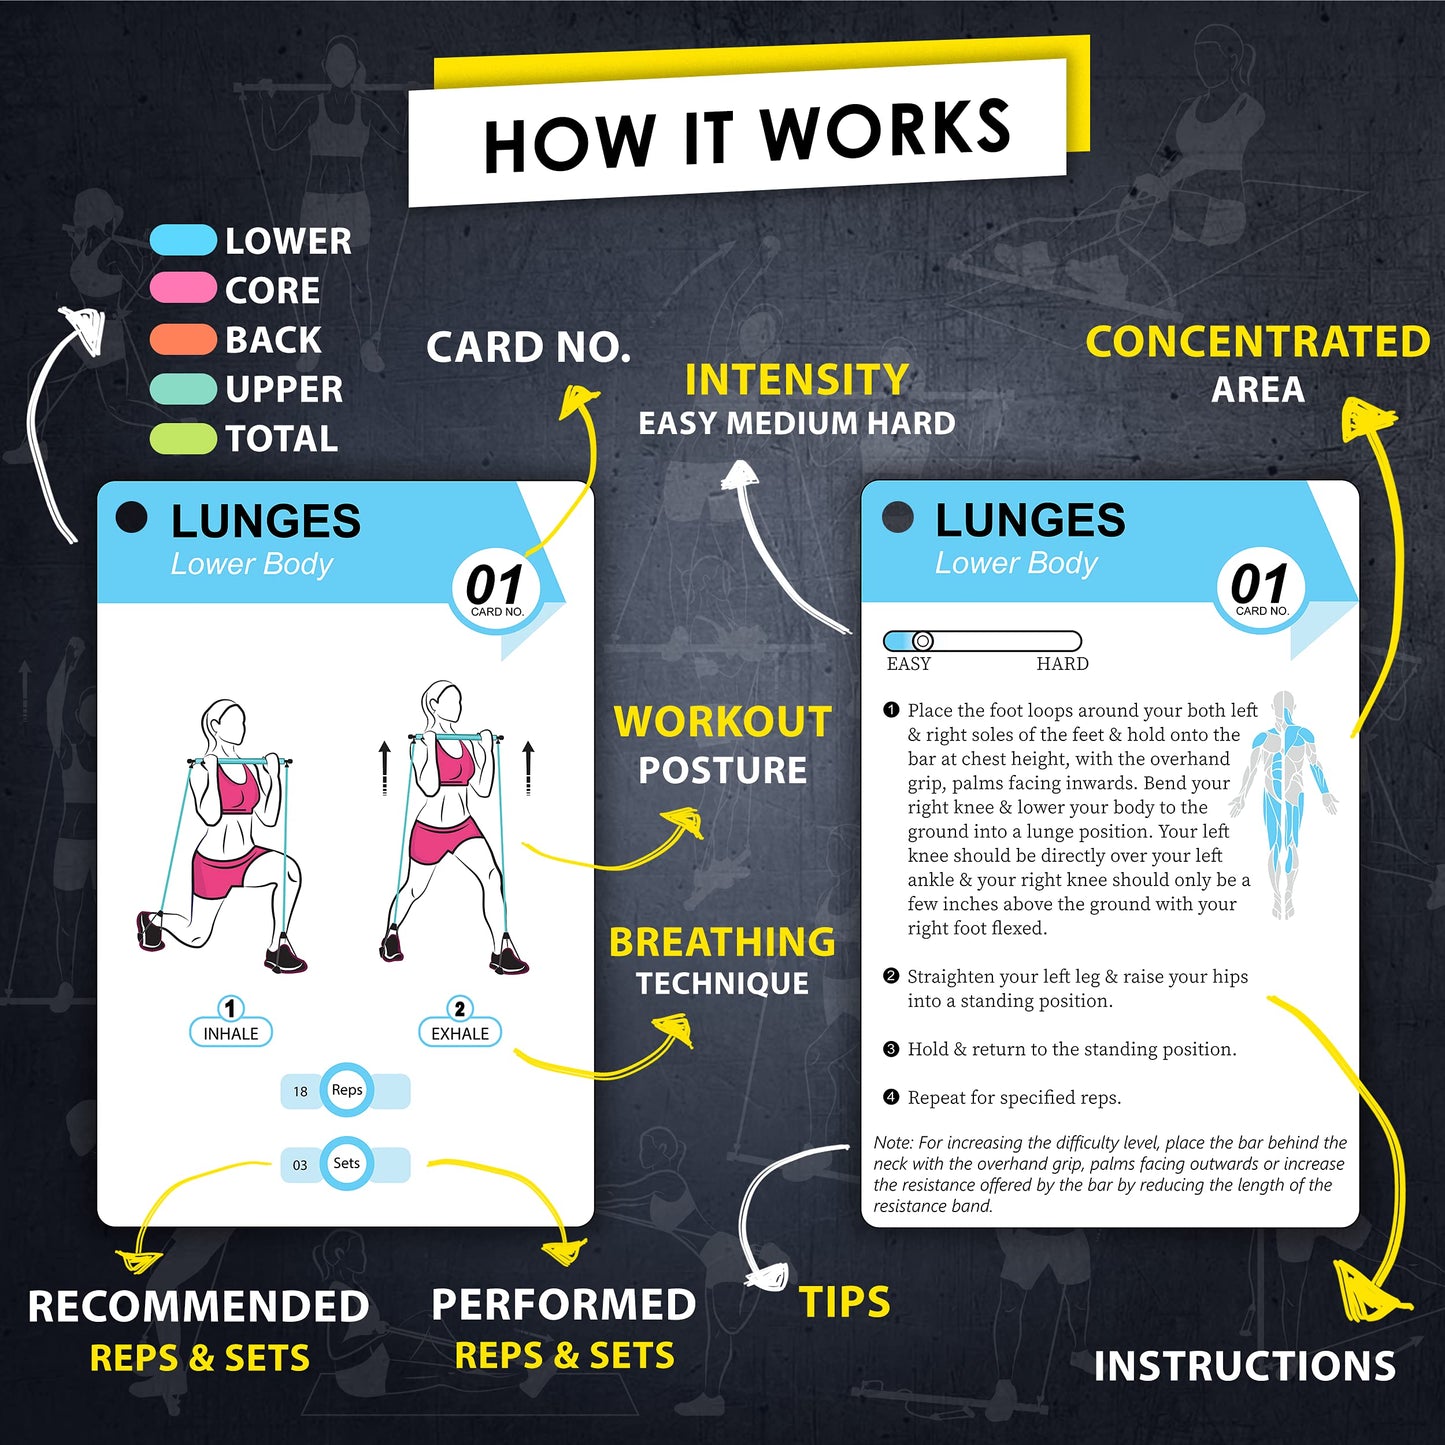 Flexies Pilates Bar Workout Cards - 58 Exercise Cards with Pilates Stick Work Out Postures, Instructions & Breathing Tips | Free Ring & Dry-Erase Marker to Create Your Customize Workout Planner Chart